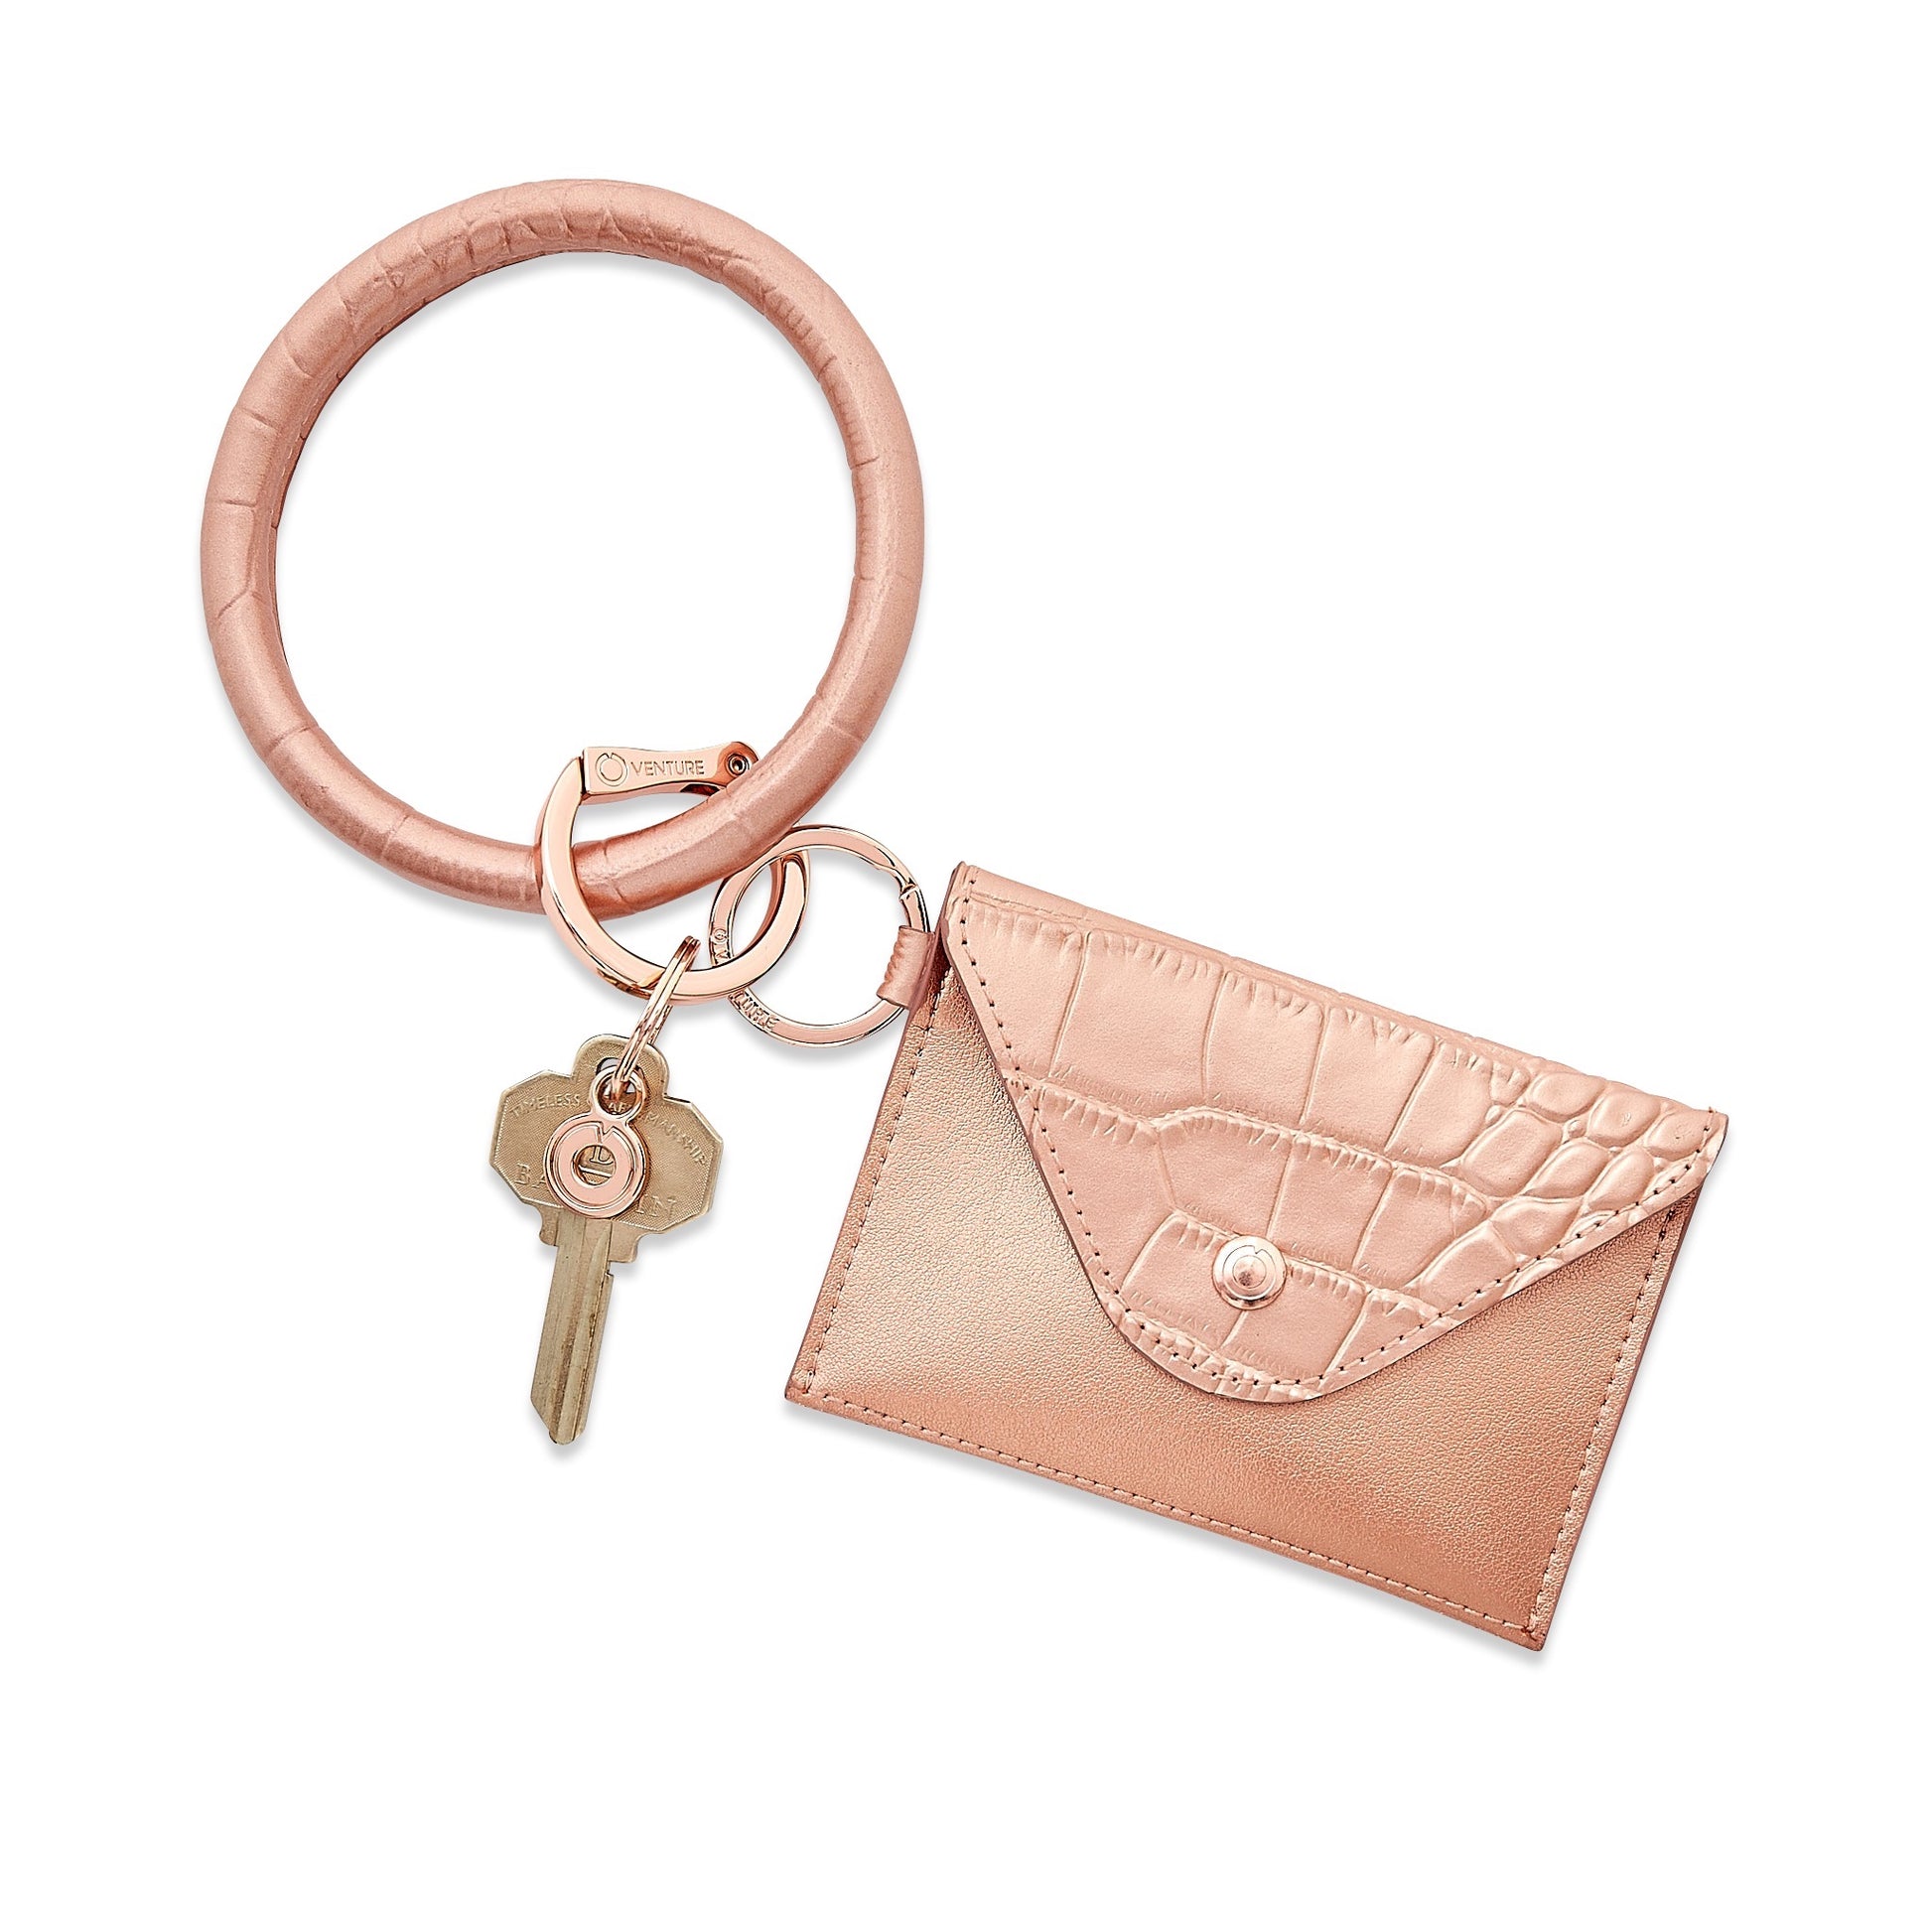 Stylish leather keychain wallet in mini envelope design shown with key ring bracelet in rose gold.